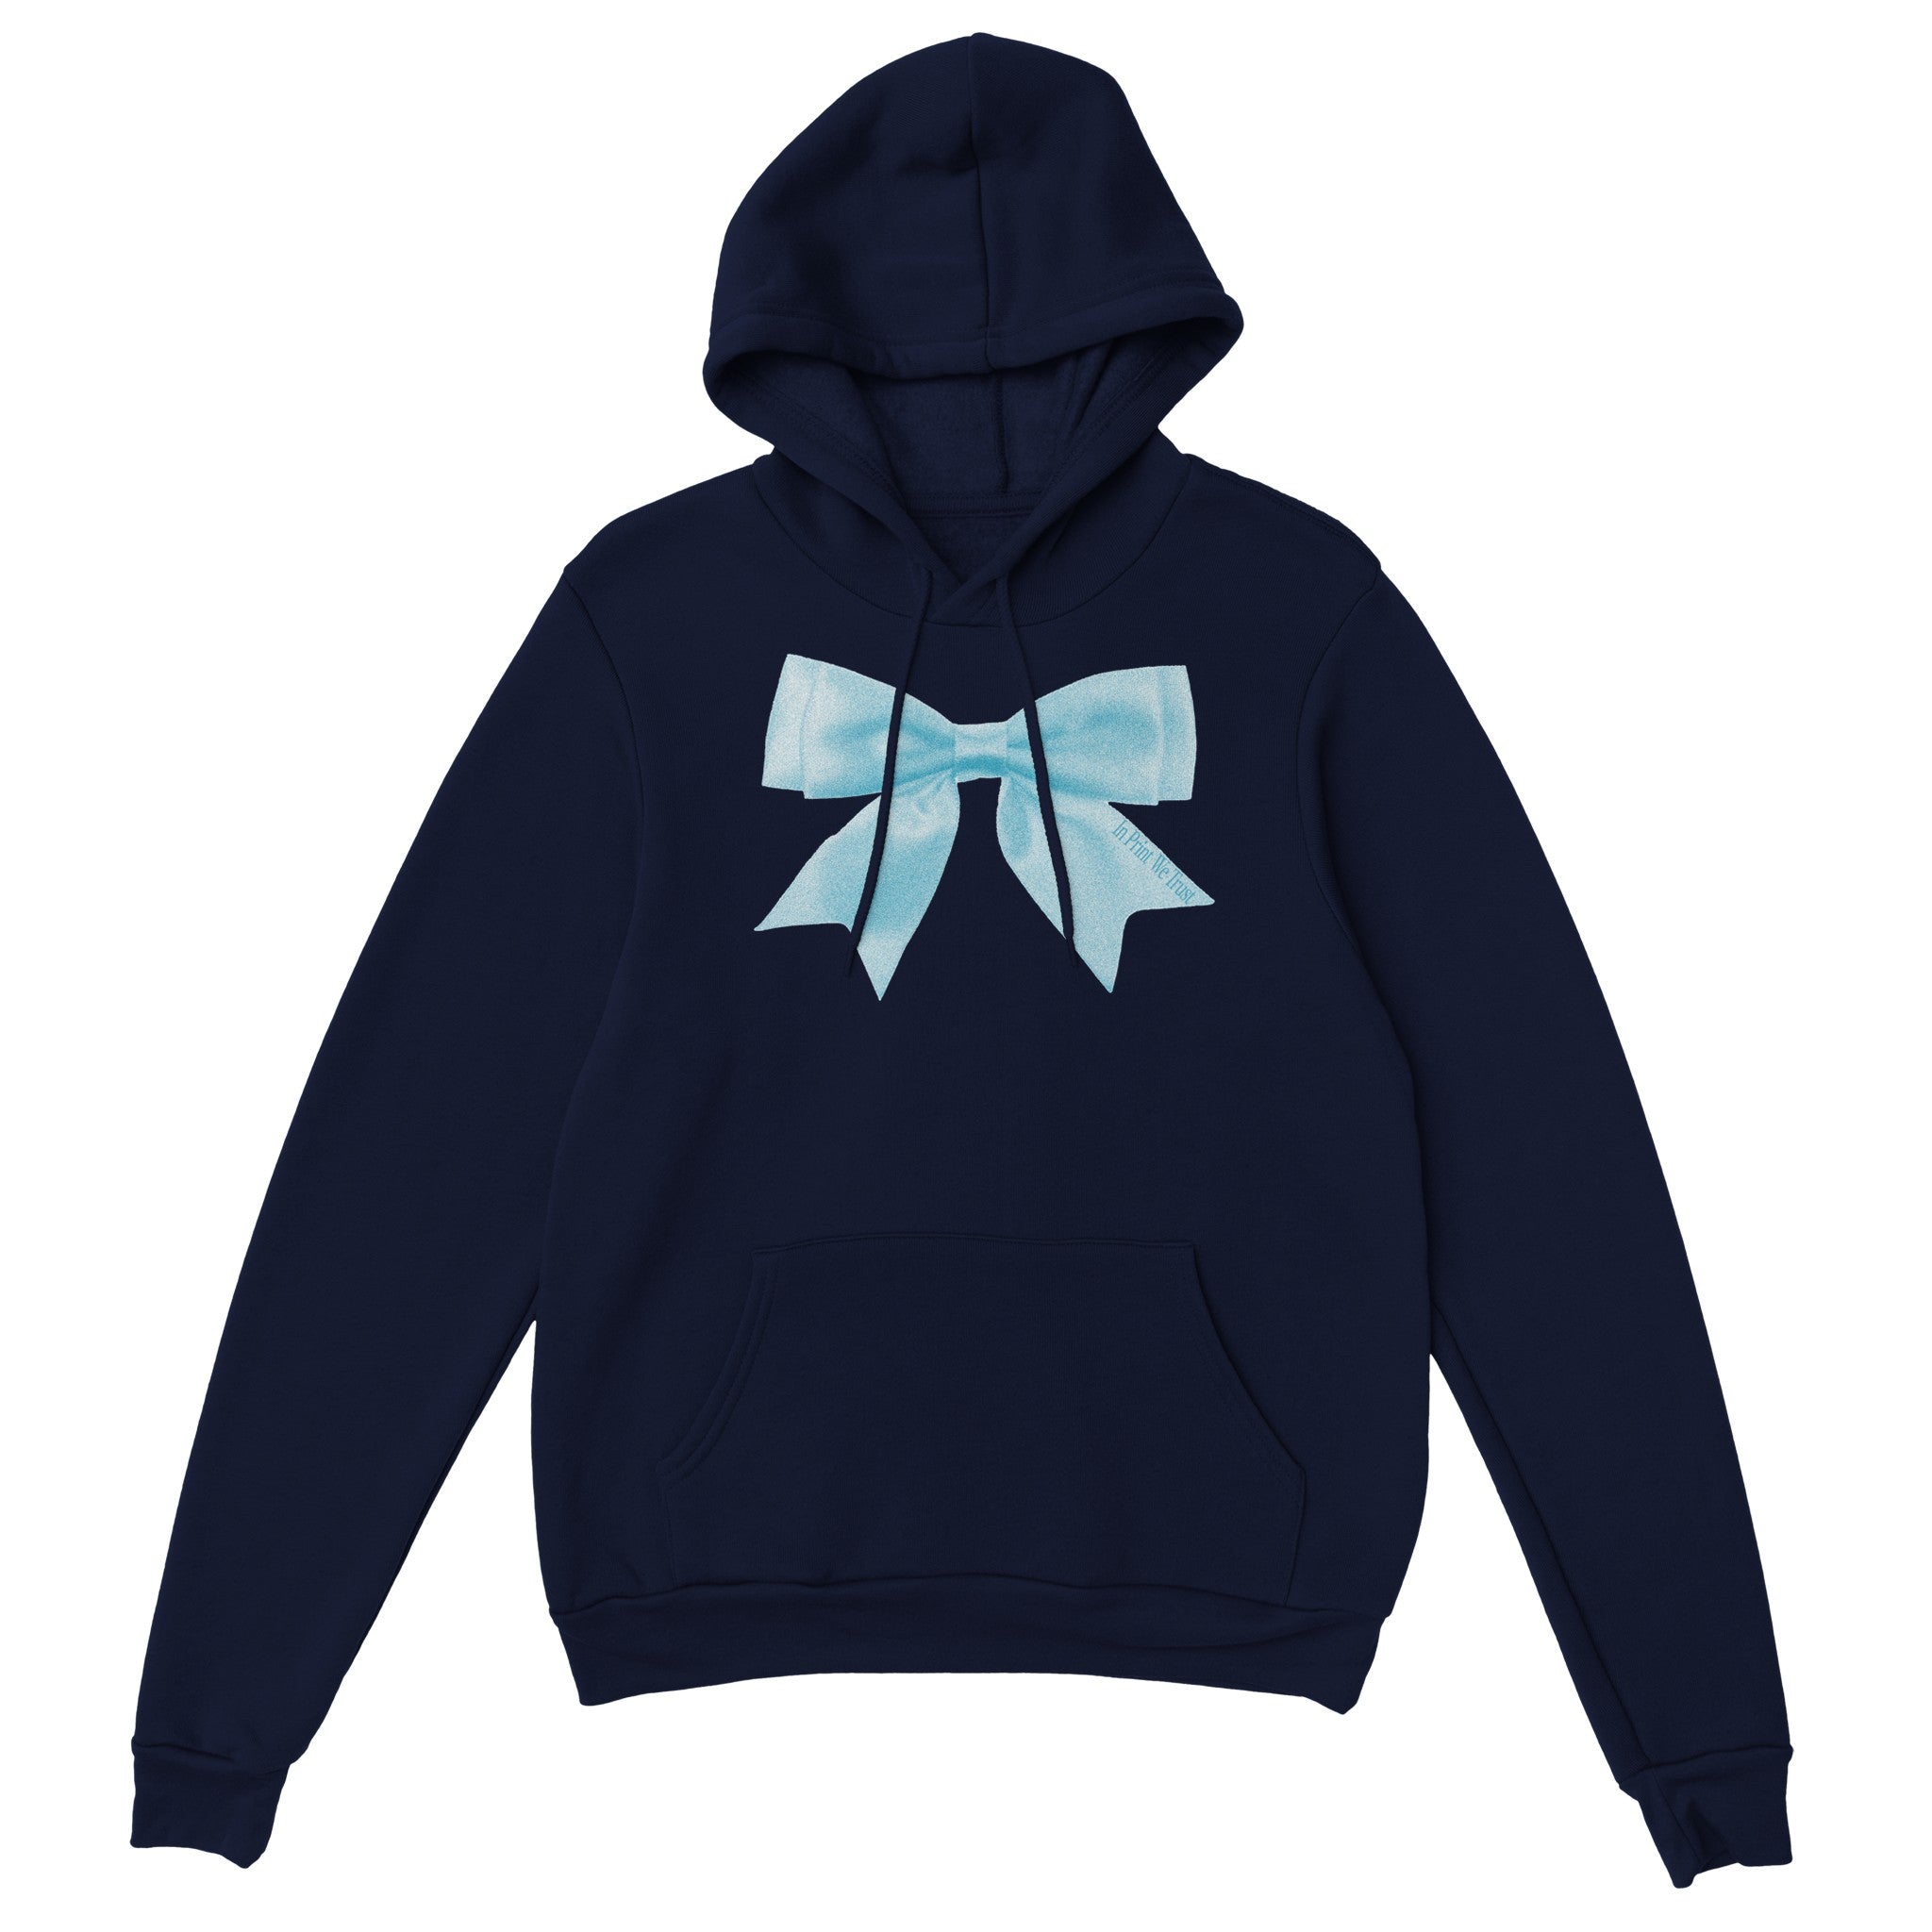 'Put a Bow On It' hoodie